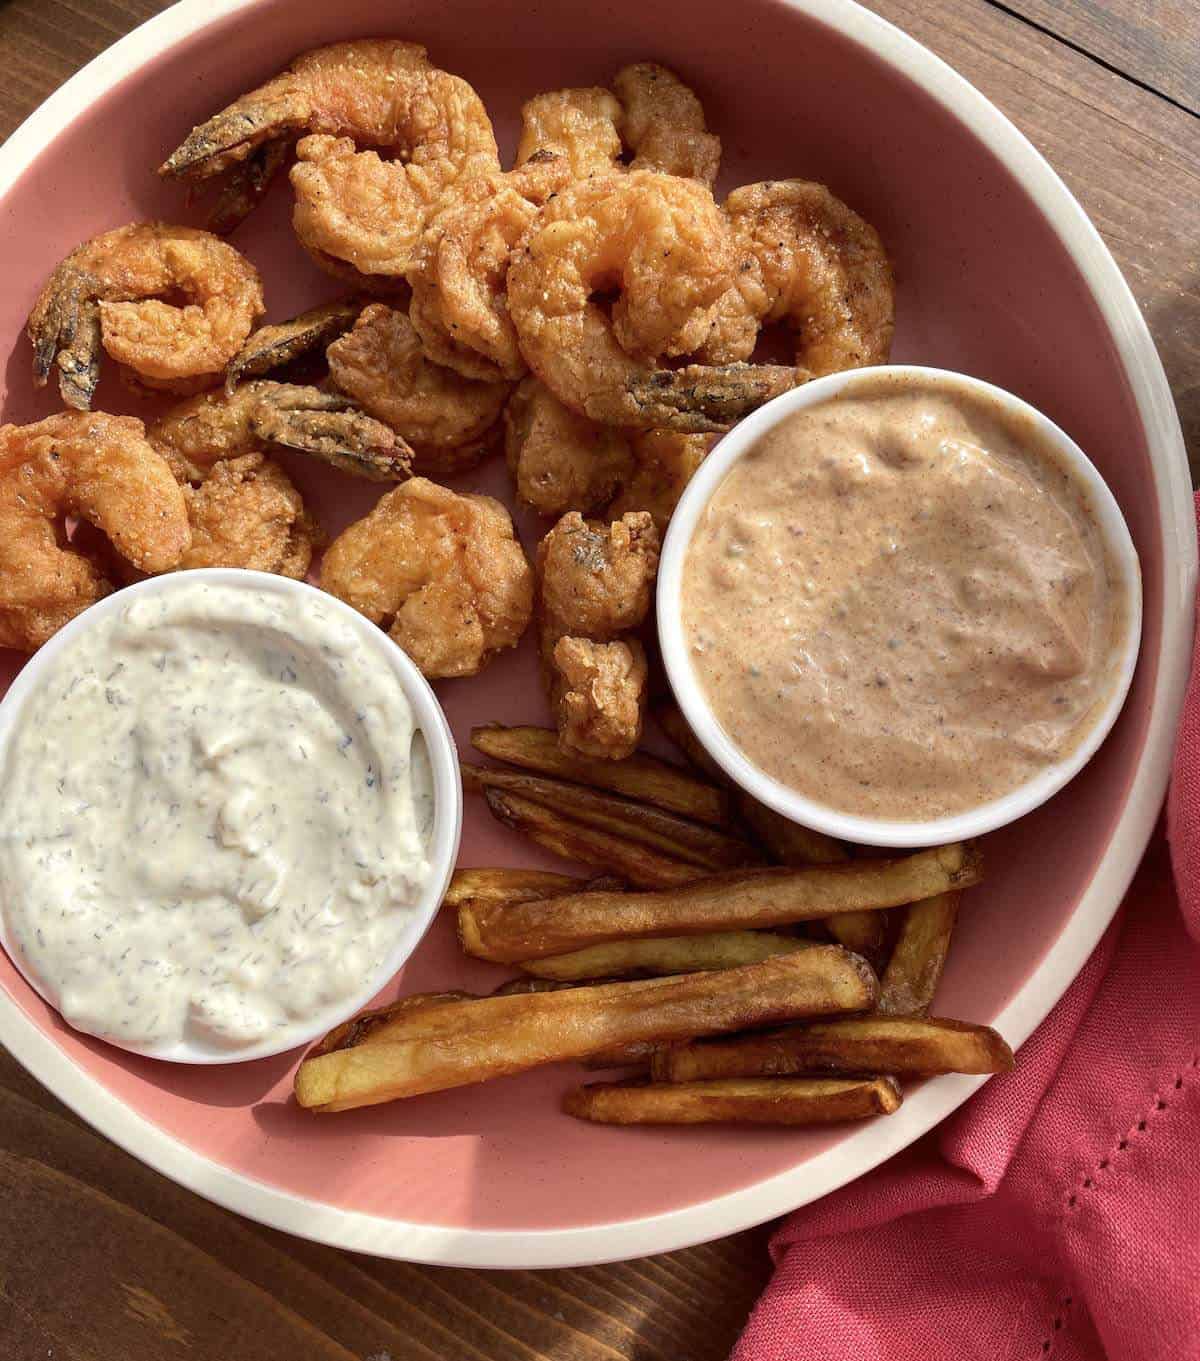 A pink bowl with french fries, fried shrimp, tartar sauce, and remoulade sauce.